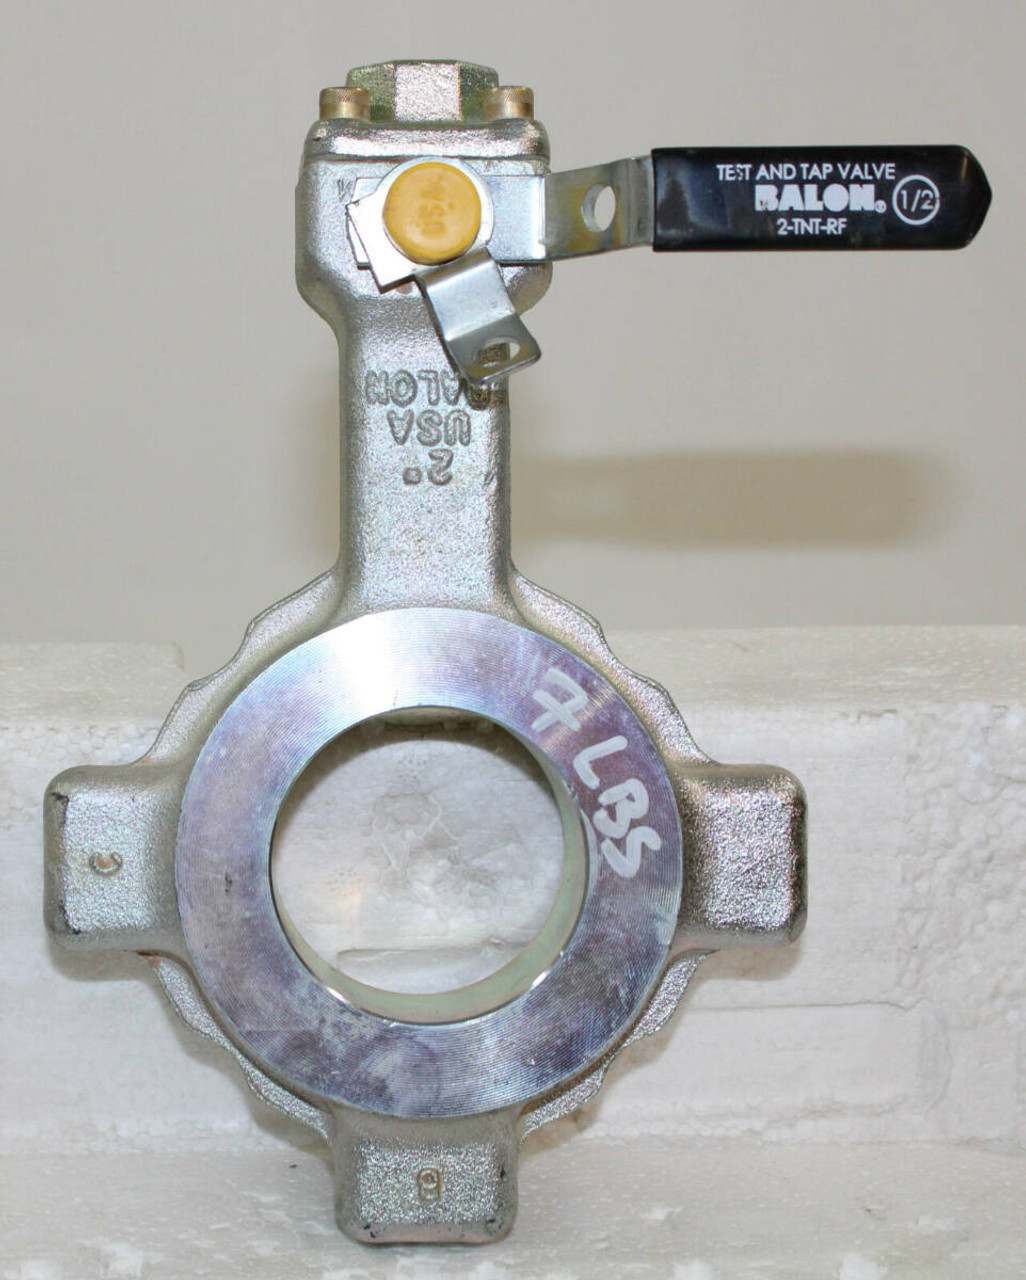 Balon 2-TNT-RF Test and Tap Valve 2 Inch 150-3-600 Psig Flanged 3000WP